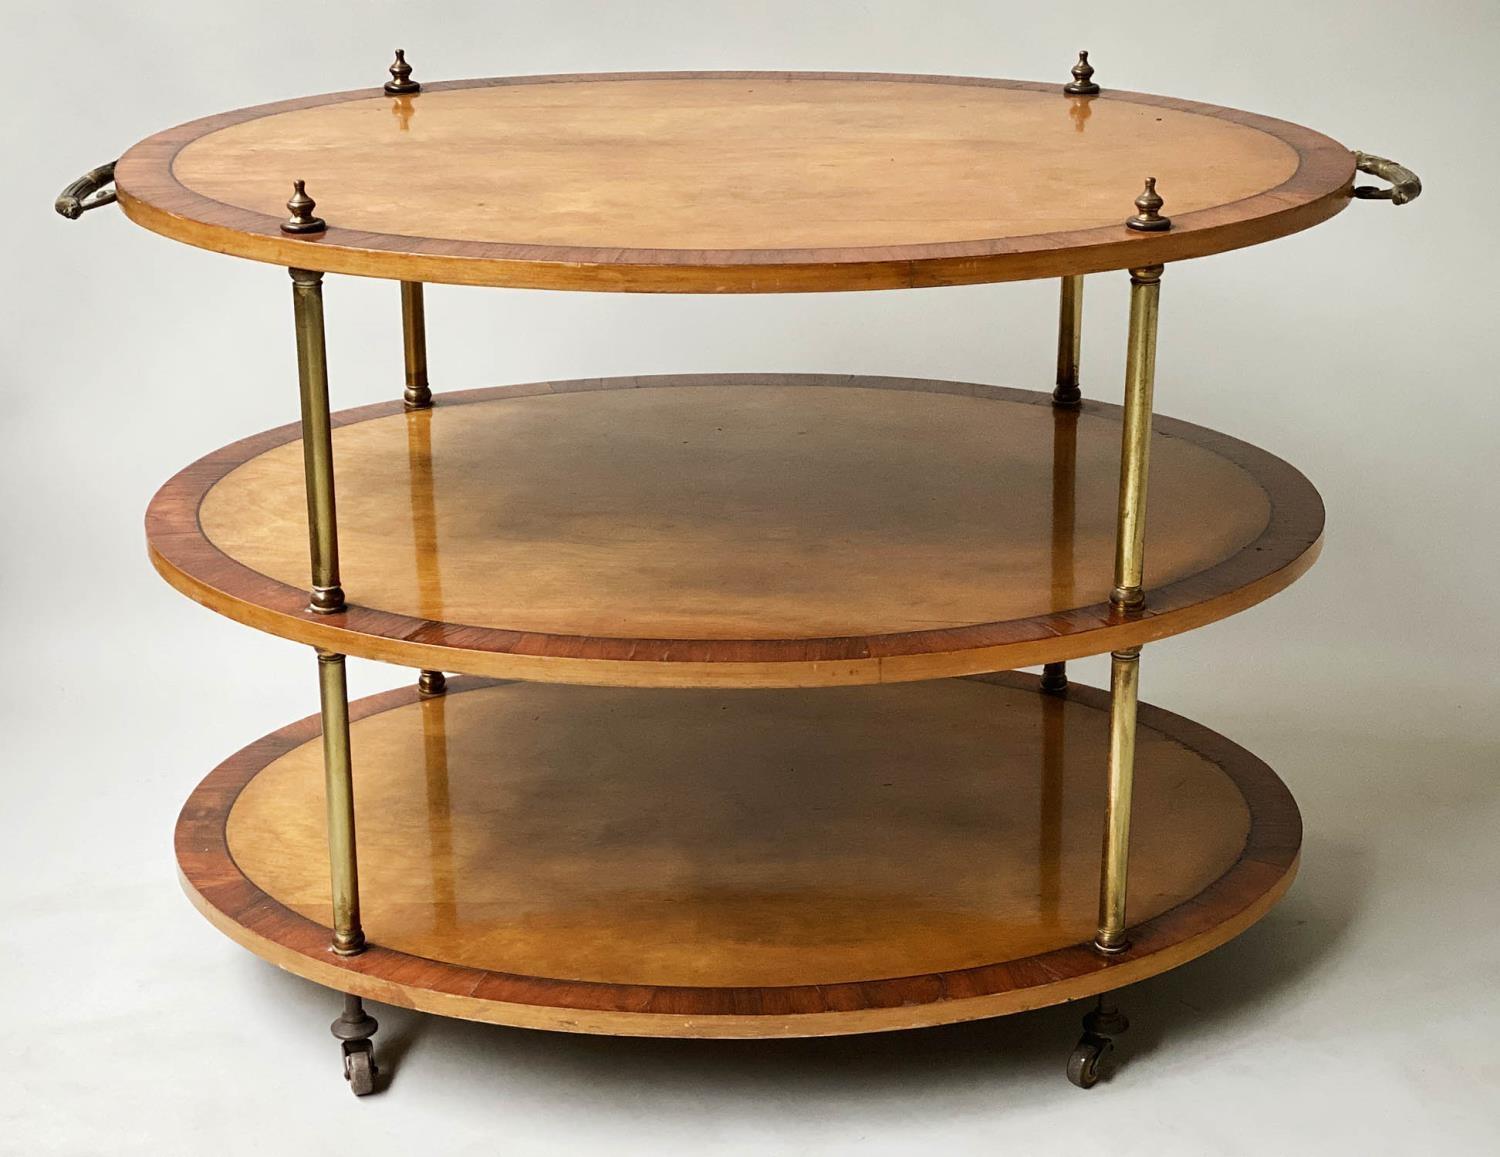 ETAGERE, Edwardian manner oval satinwood and rosewood crossbanded of two tiers with brass pillars - Image 2 of 8